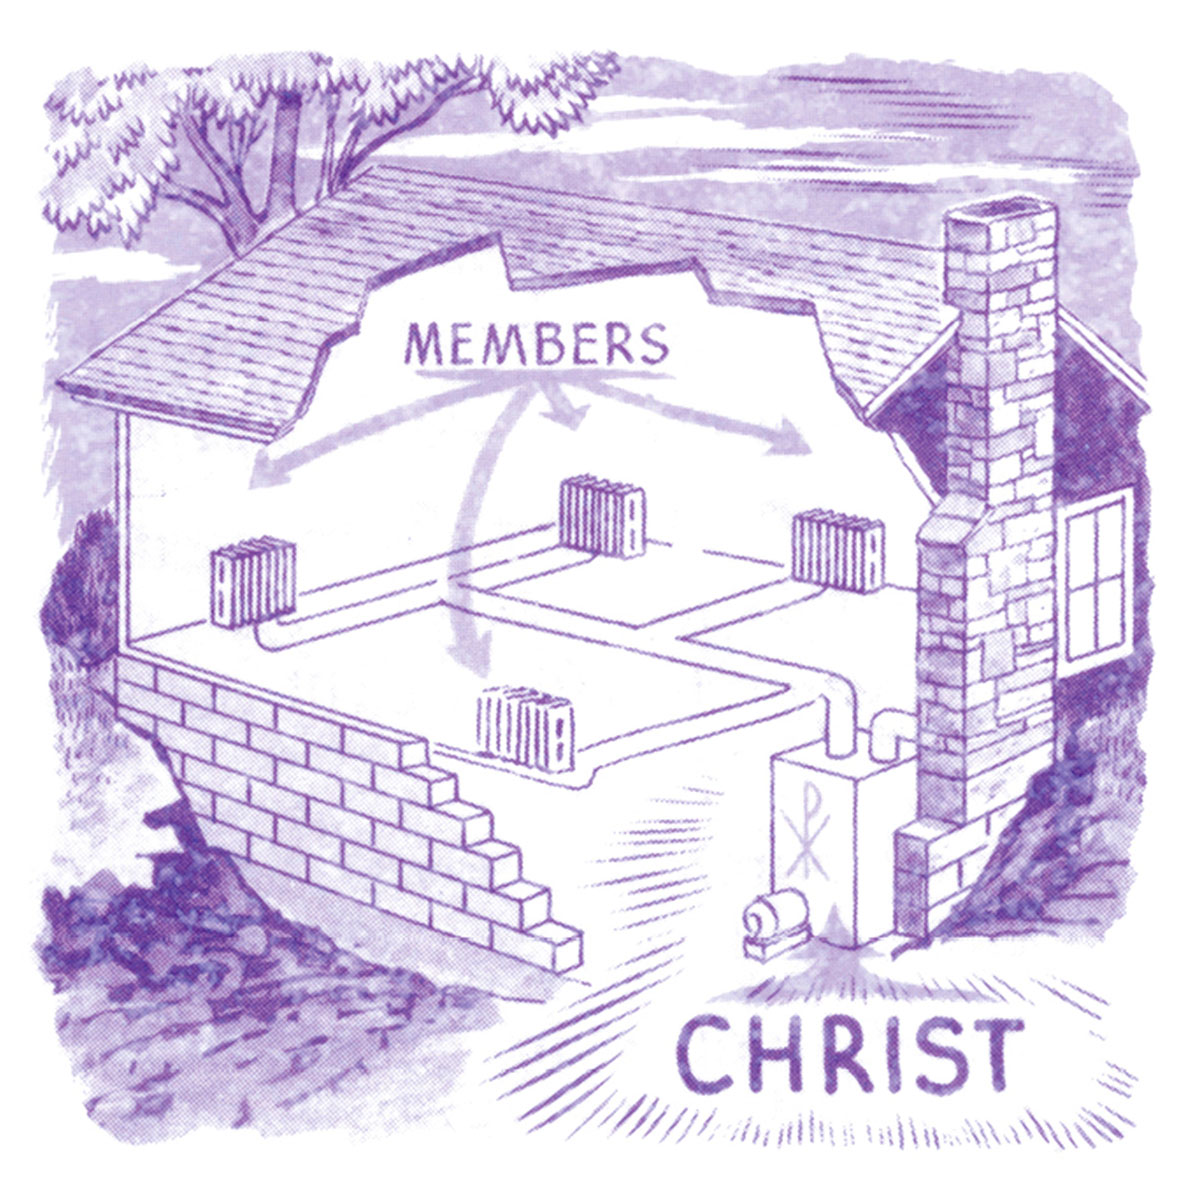 A drawing made using a ditto machine depicting a cross section of a house with the radiators labeled as “members” and “Christ” as the generator.A drawing of a cross section of a house with the radiators labeled as “members” and “Christ” as the generator.